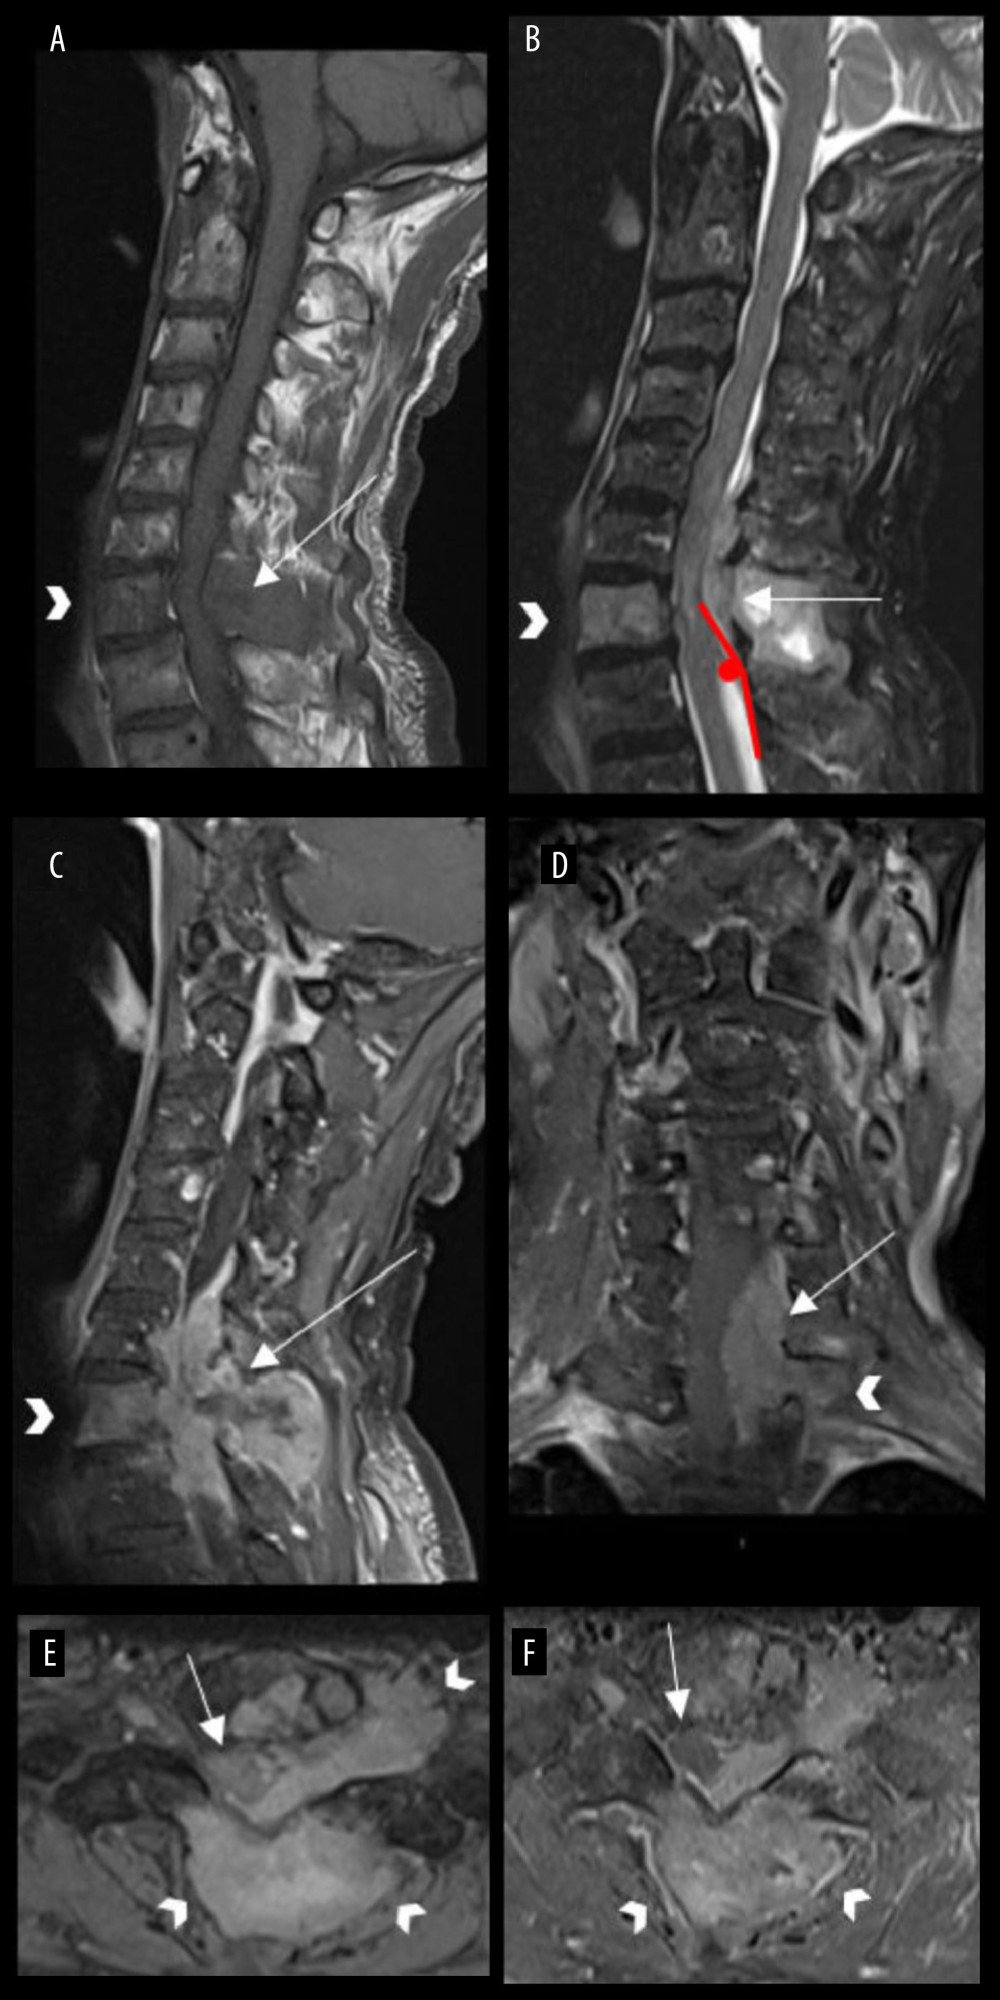 Preoperative MRI scans of an 82-year-old man who presented with a spinal tumor. (A) Sagittal T1-weighted (W) and (B) T2W pre-contrast images show a T1 hypo-and T2 hyper-intense spinal tumor infiltrating the C7 vertebra (arrowheads) and (lesser extend) T1 vertebral body. The tumor extends from C5 to T2 vertebral levels. The tumor makes an obtuse angle (red angle) with the longitudinal flow of the cerebrospinal fluid (CSF) on the sagittal image (B). This indicates the extra-dural location of the tumor. It causes a significant mass effect on the spinal cord, with focal high T2 cord signal (red arrows, B). (C) Sagittal and (D) coronal T1-weighted post-contrast images show the left lateral extradural tumor compresses the spinal cord/thecal sac and extends into the paraspinal region as well as widening the left C7-T1 neural foramen (arrowhead, D). (E) Axial T2W and (F) T1W post-contrast images show the extradural tumor displaces the spinal cord and thecal sac (arrows, E and F) to the right half of the spinal canal and extends into the posterior paraspinal space with widening of the left neural foramen (arrowheads, E and F).